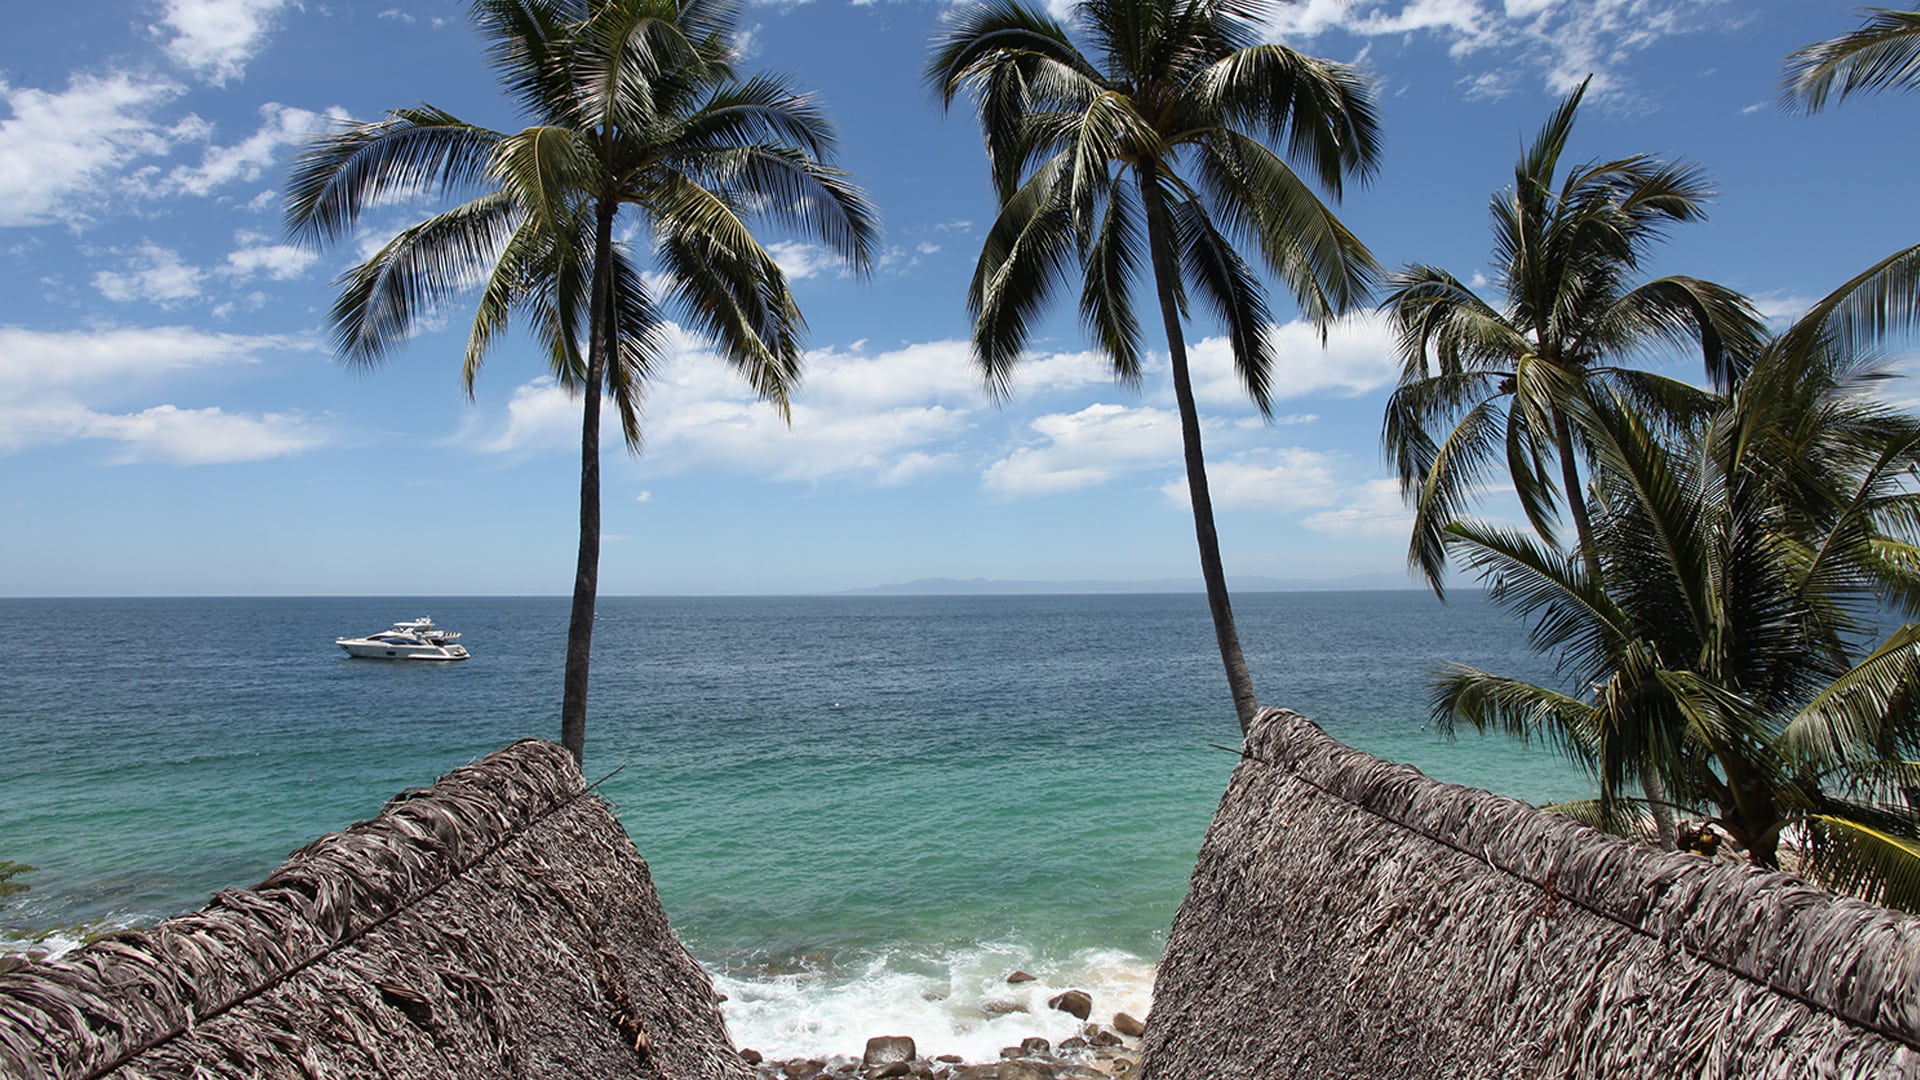 Two palapas on the beach with palm trees and a powerboat anchored nearby